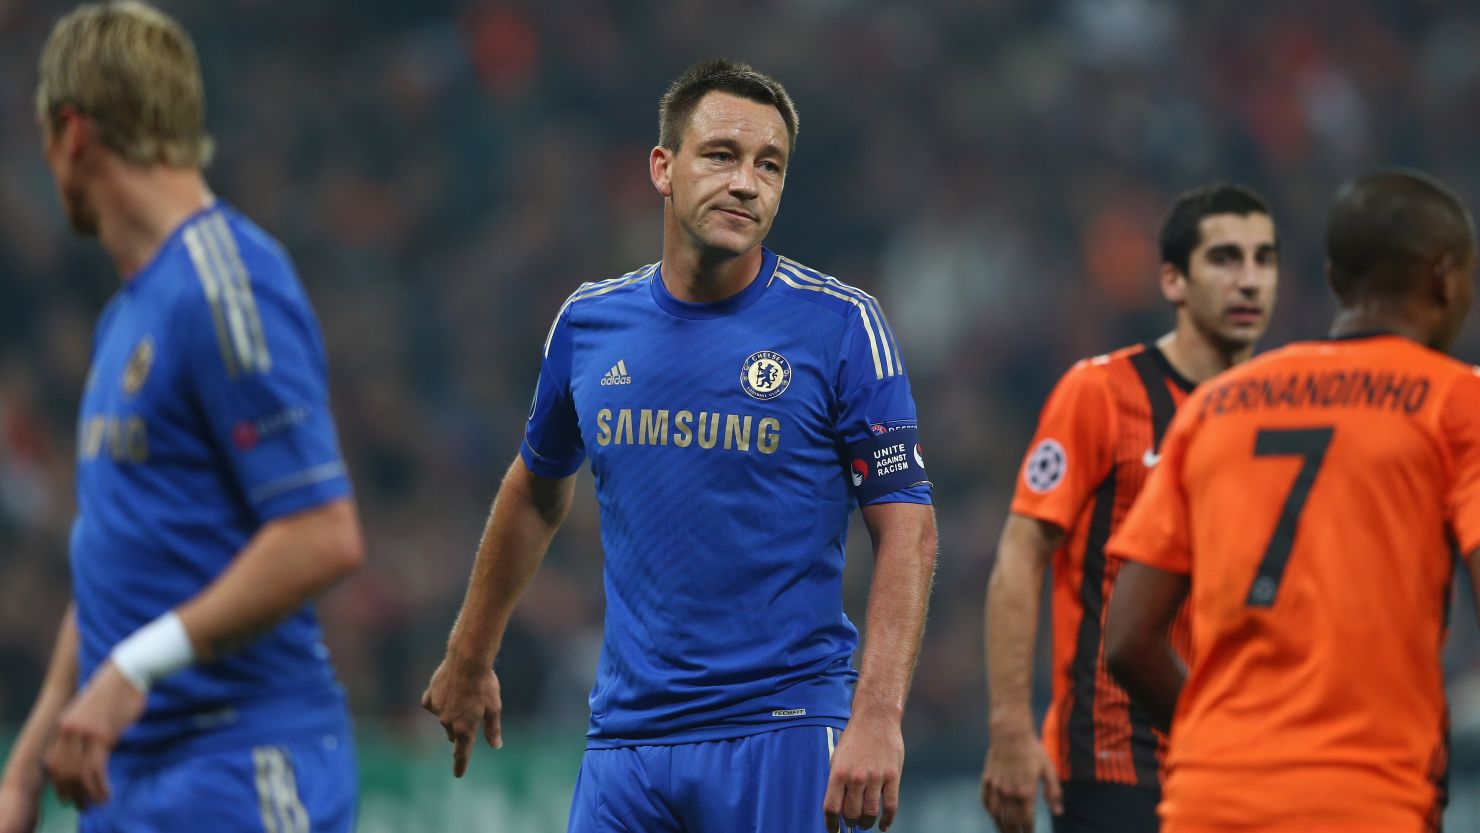 Chelsea suffer their first Champions League defeat since winning the trophy in May, as captain John Terry wears an anti-racism armband a year to the day after racially abusing an opponent in the Premier League. 